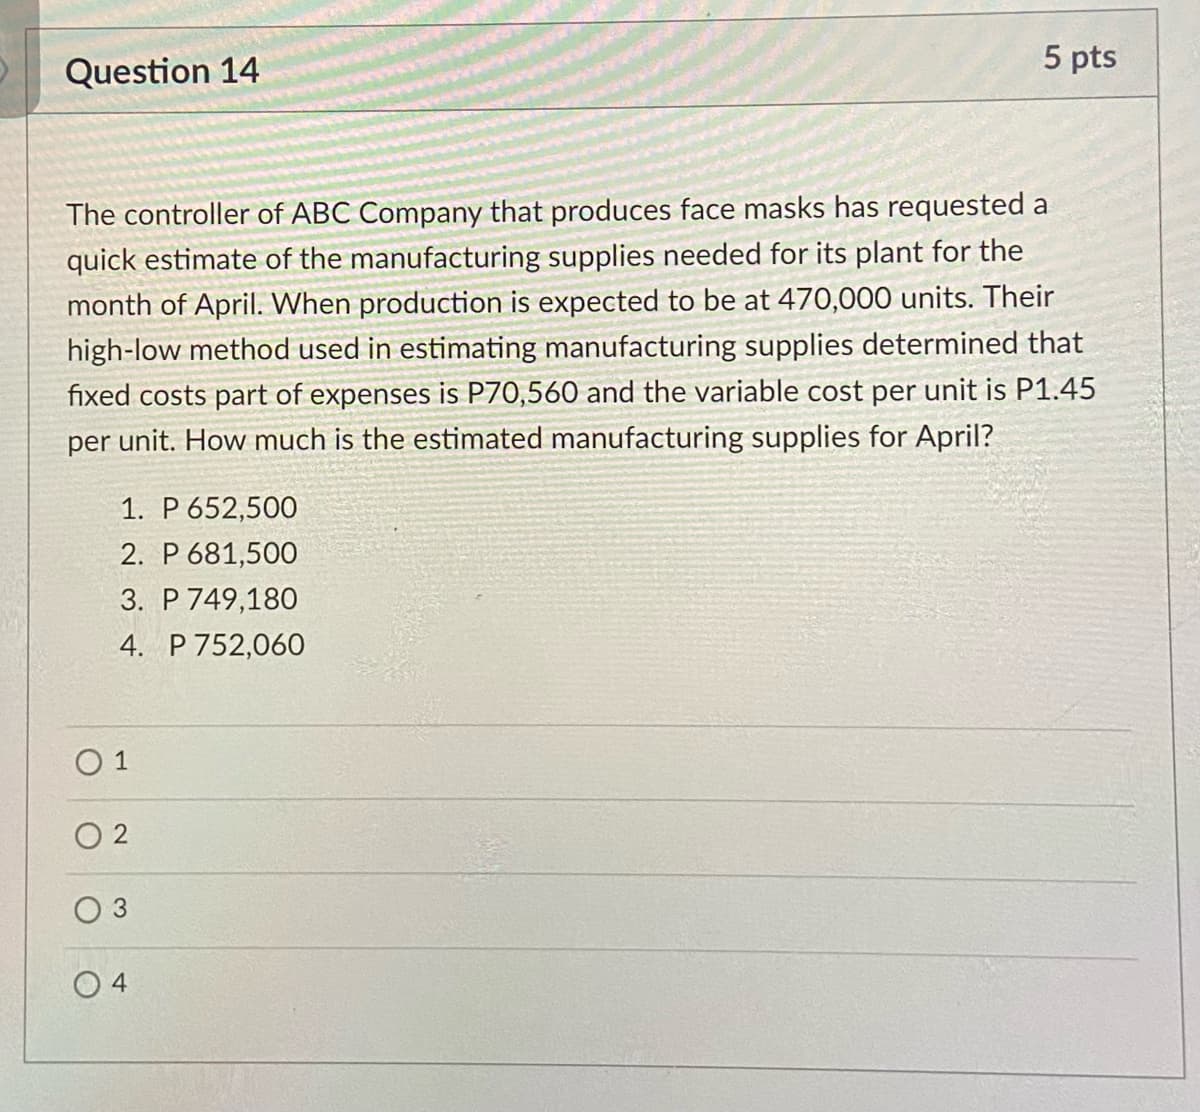 5 pts
Question 14
The controller of ABC Company that produces face masks has requested a
quick estimate of the manufacturing supplies needed for its plant for the
month of April. When production is expected to be at 470,000 units. Their
high-low method used in estimating manufacturing supplies determined that
fixed costs part of expenses is P70,560 and the variable cost per unit is P1.45
per unit. How much is the estimated manufacturing supplies for April?
1. P 652,500
2. P 681,500
3. P 749,180
4. P 752,060
O 1
O 2
O 4
